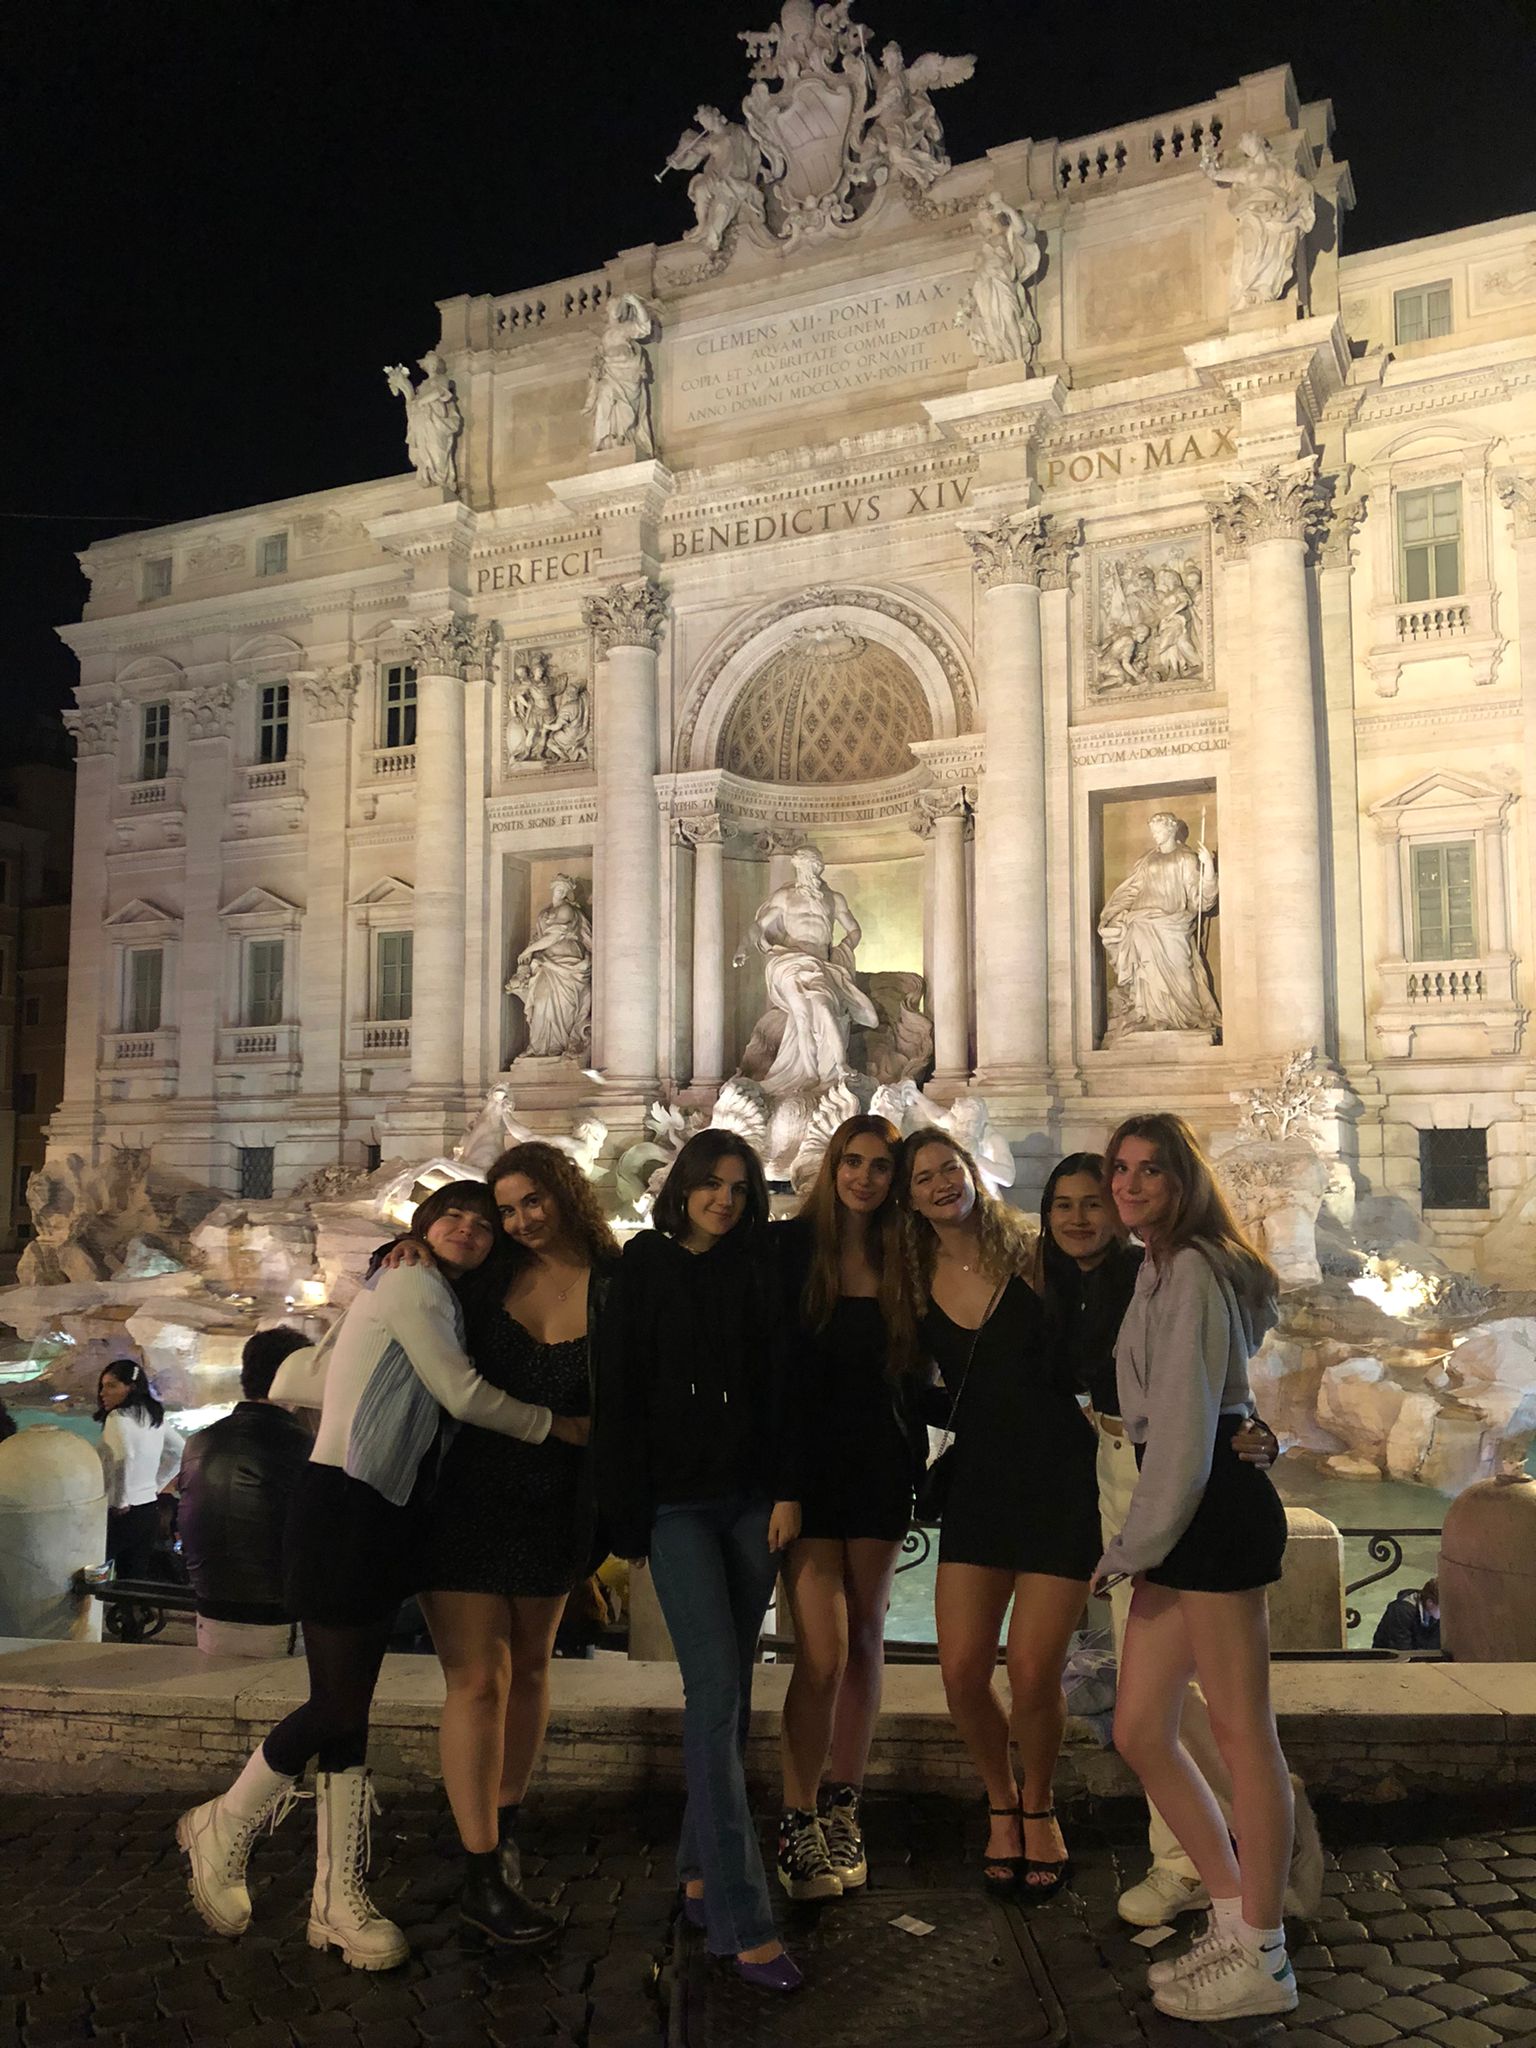 The Trevi Fountain at 3:00am